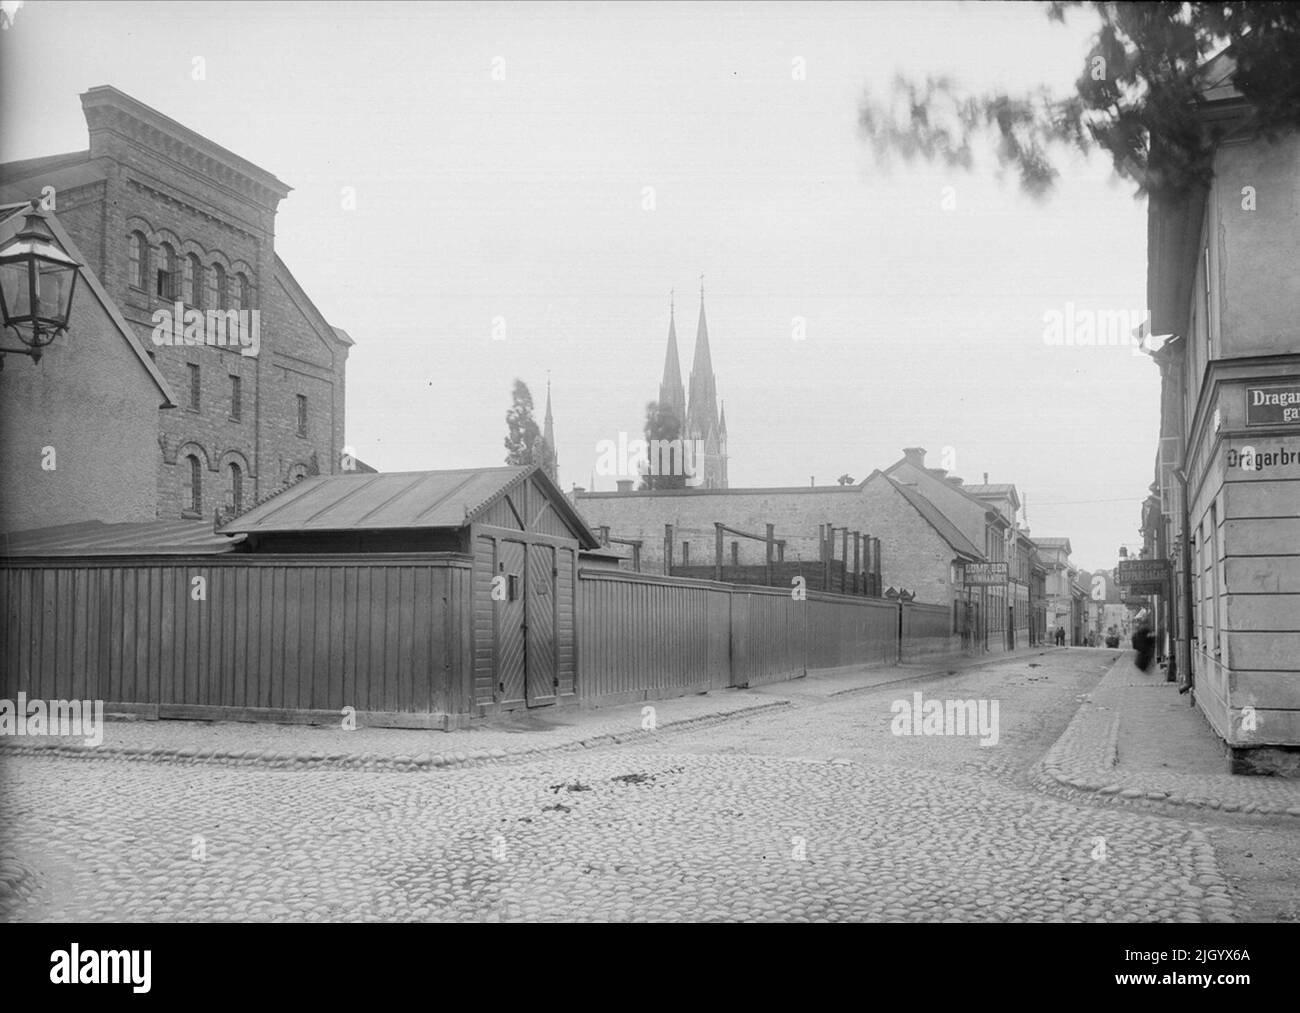 S: t Olofsgatan - Dragarbrunnsgatan in Uppsala 1901 - 1902 with Upsala Bavarian Brewery AB. Järnbrogatan (St. Olofsgatan) towards southwest from Dragarbrunnsgatan. Upsala Bavaria Bryggeri AB had a large farm against Järnbrogatan. The magazine on the left was built in 1881 according to the 1880 city plan. The building's gable to the street was therefore placed and designed given that it would be named against the broad esplanade that Järnbrogatan would be made according to the city plan. The implementation of the widening came to be delayed until the 1960s. 'From Ola Ehn & Gunnar Elfström, the Stock Photo